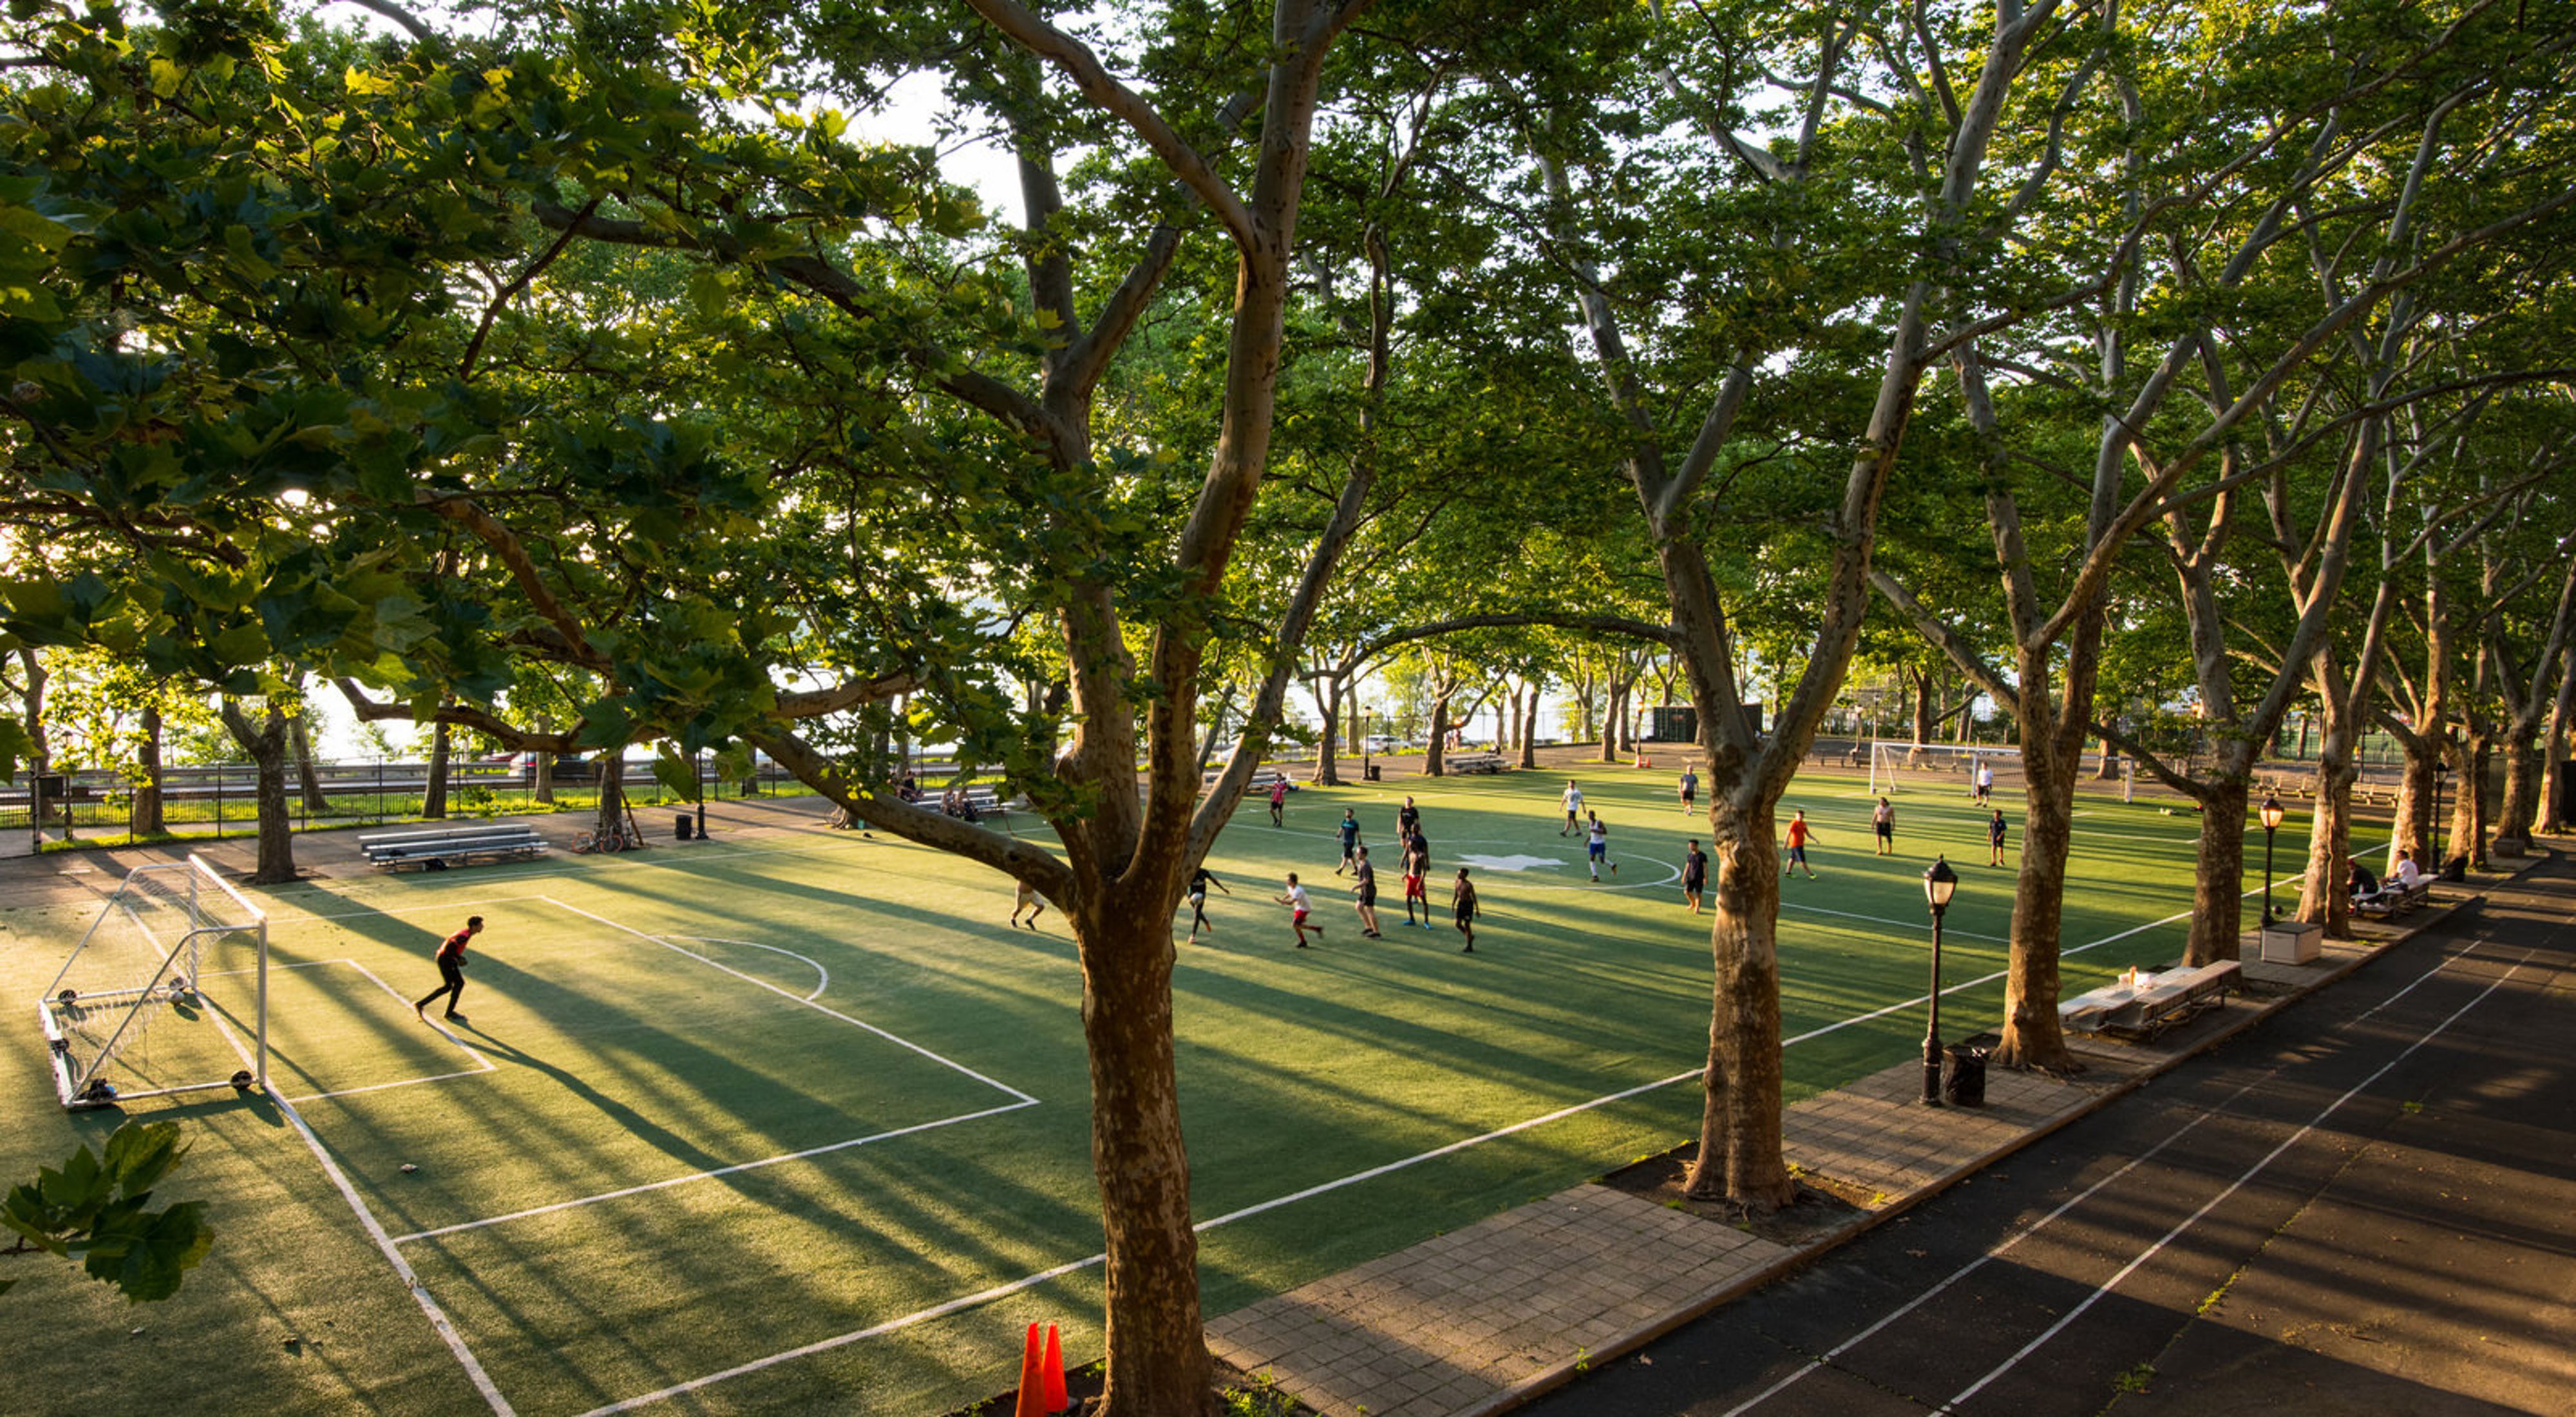 People play soccer on a field surrounded by large trees in New York City